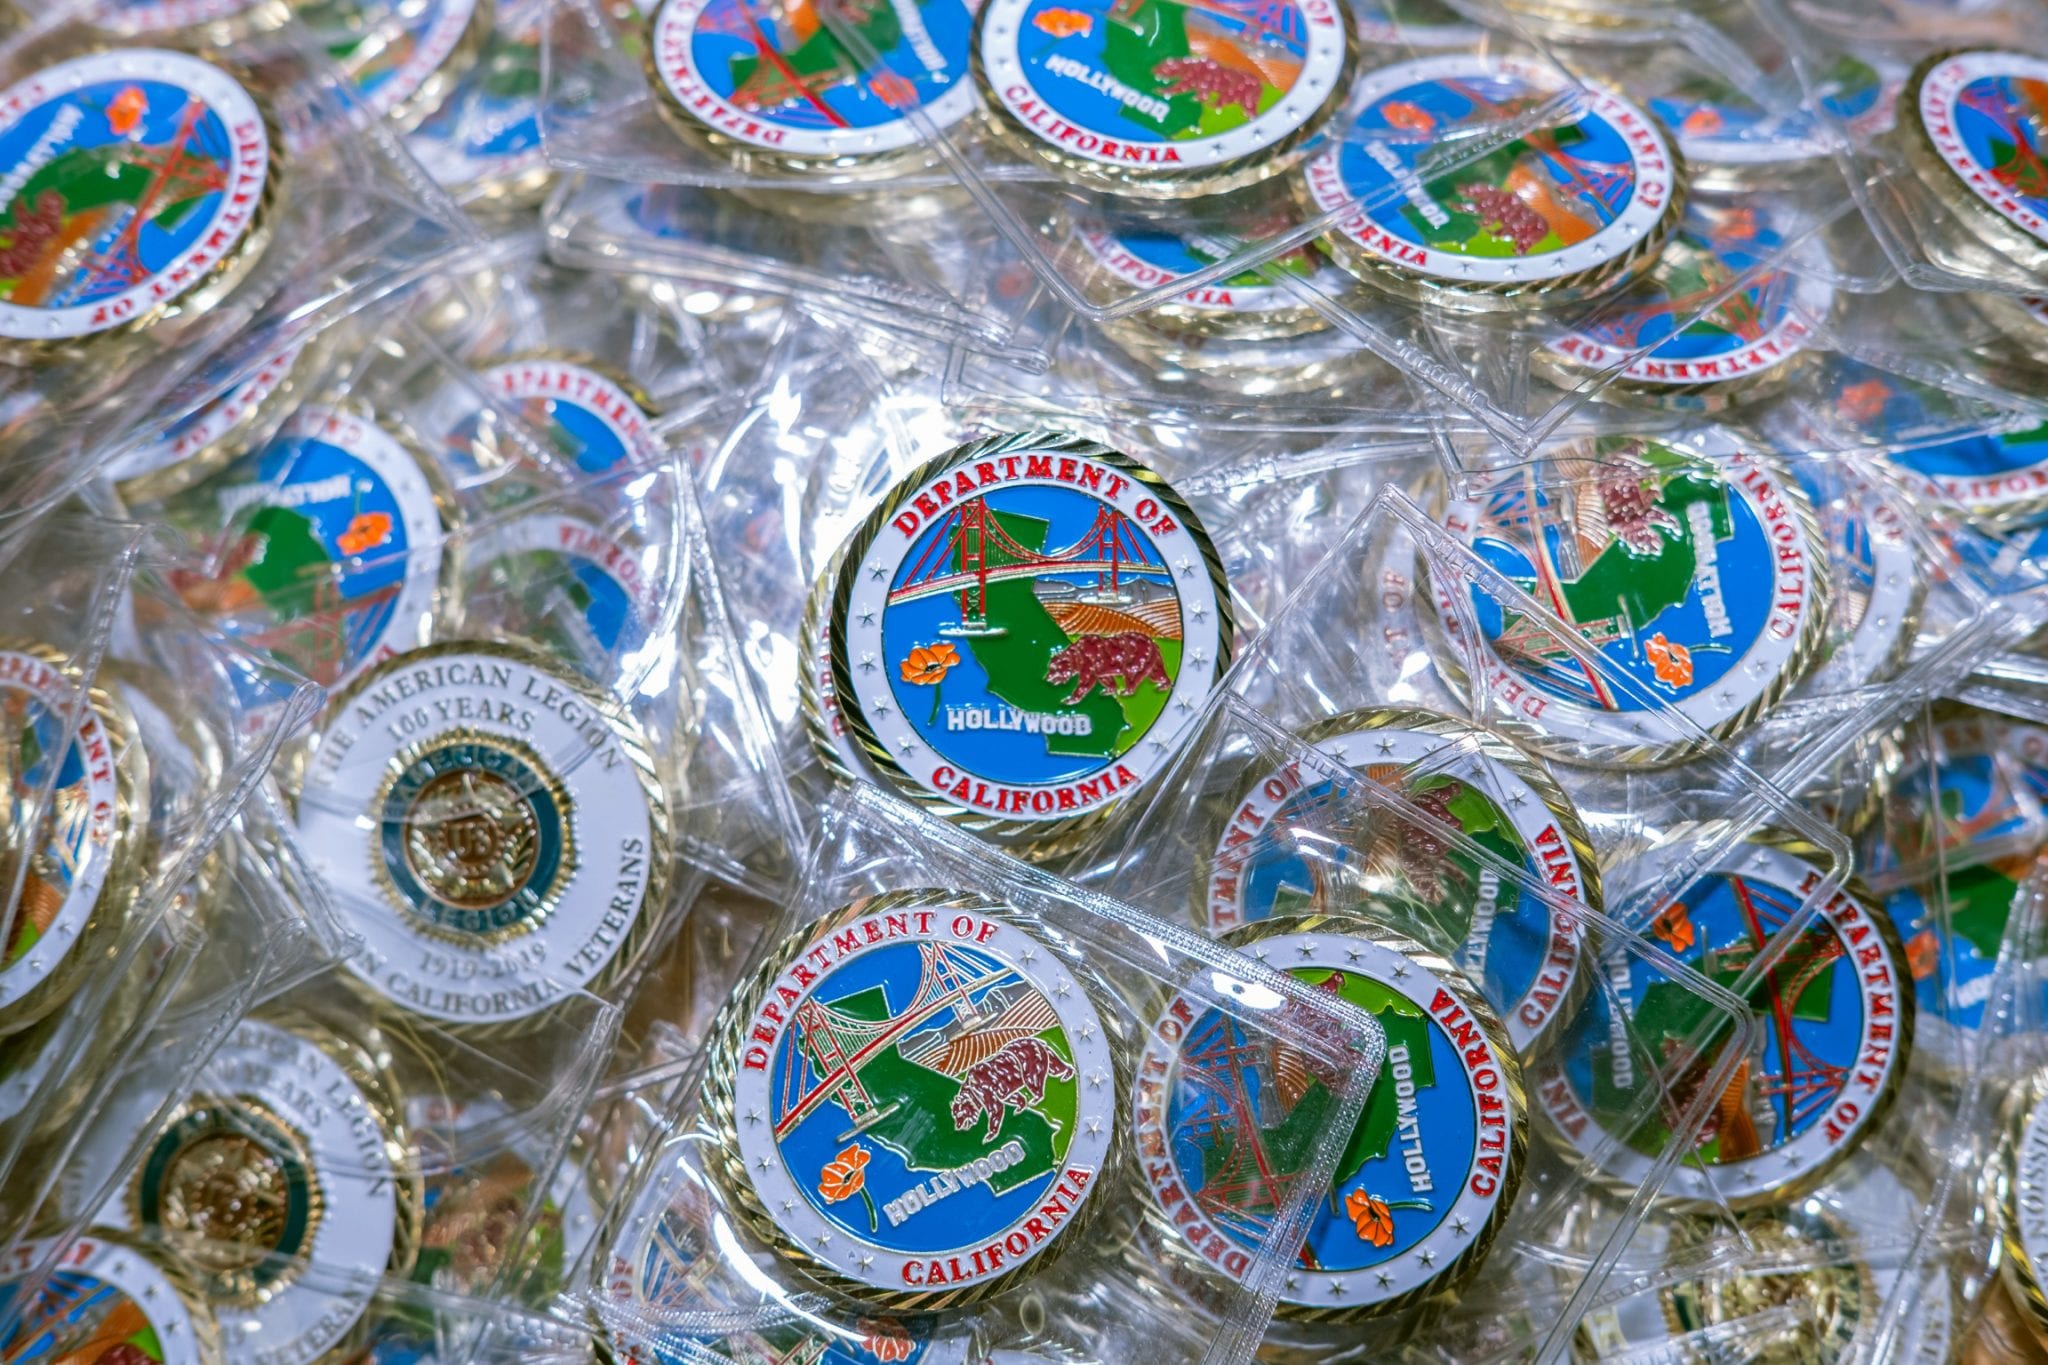 department of california challenge coins